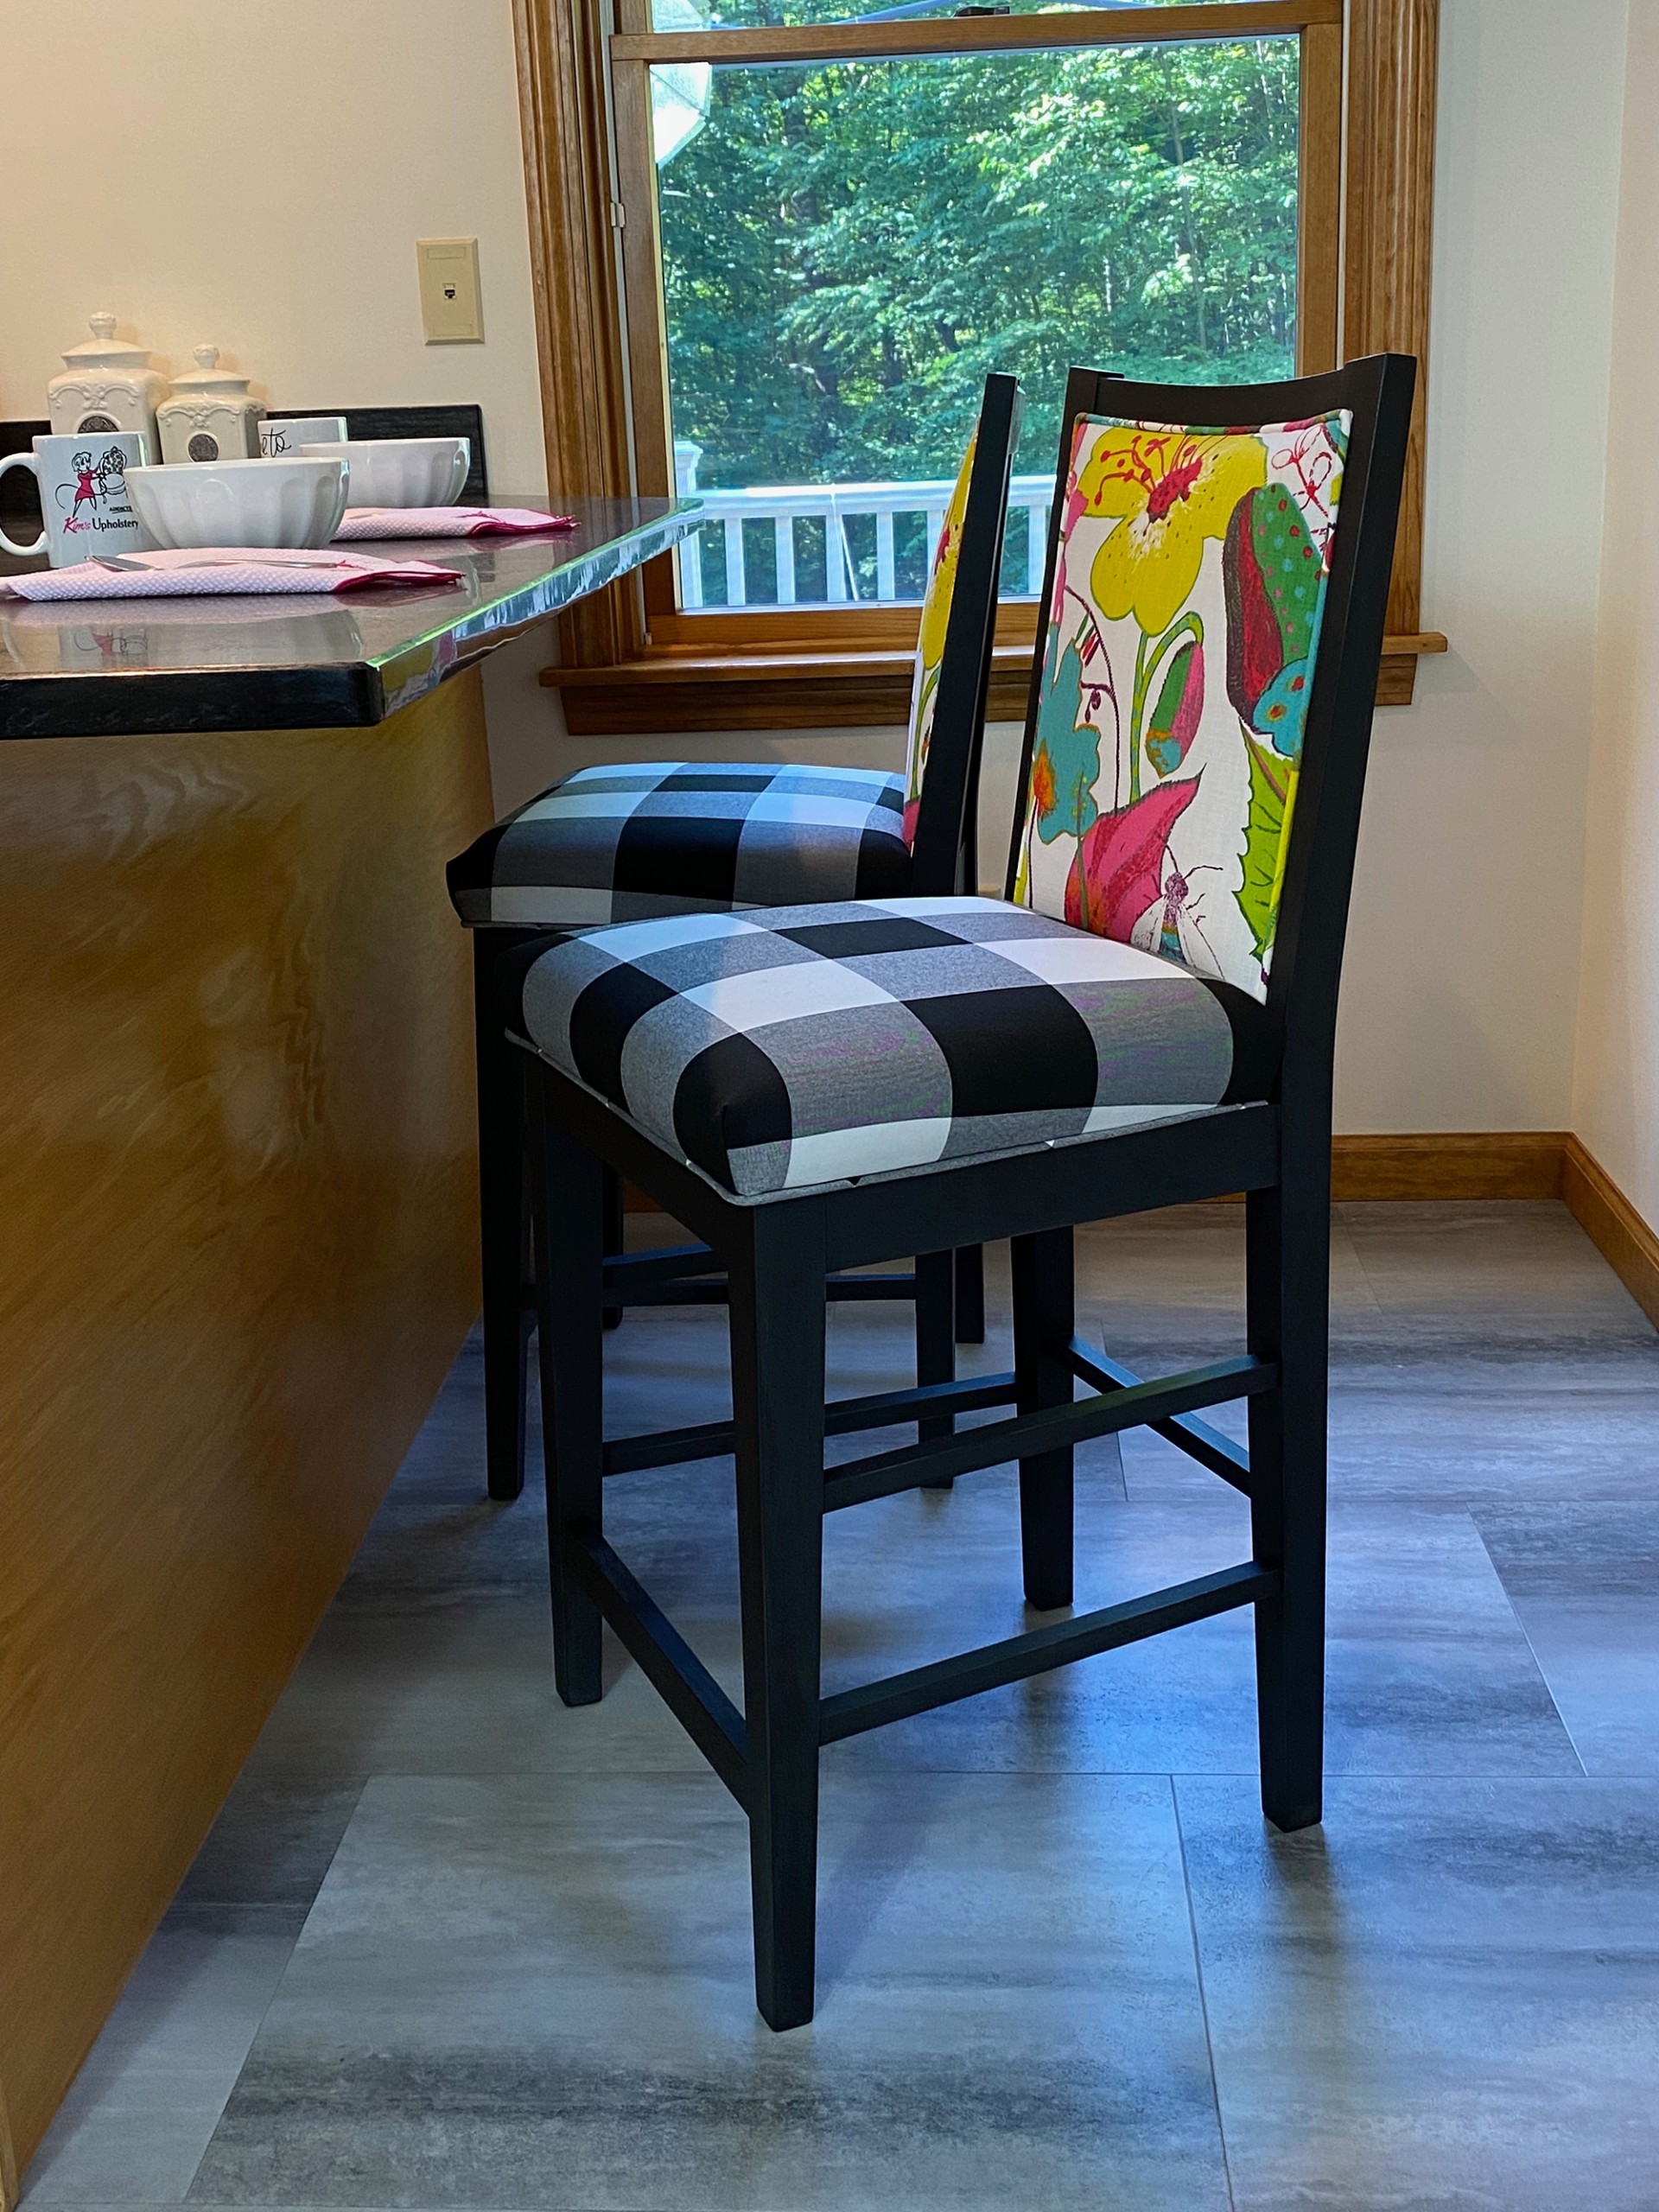 completed upholstery of dining room chair